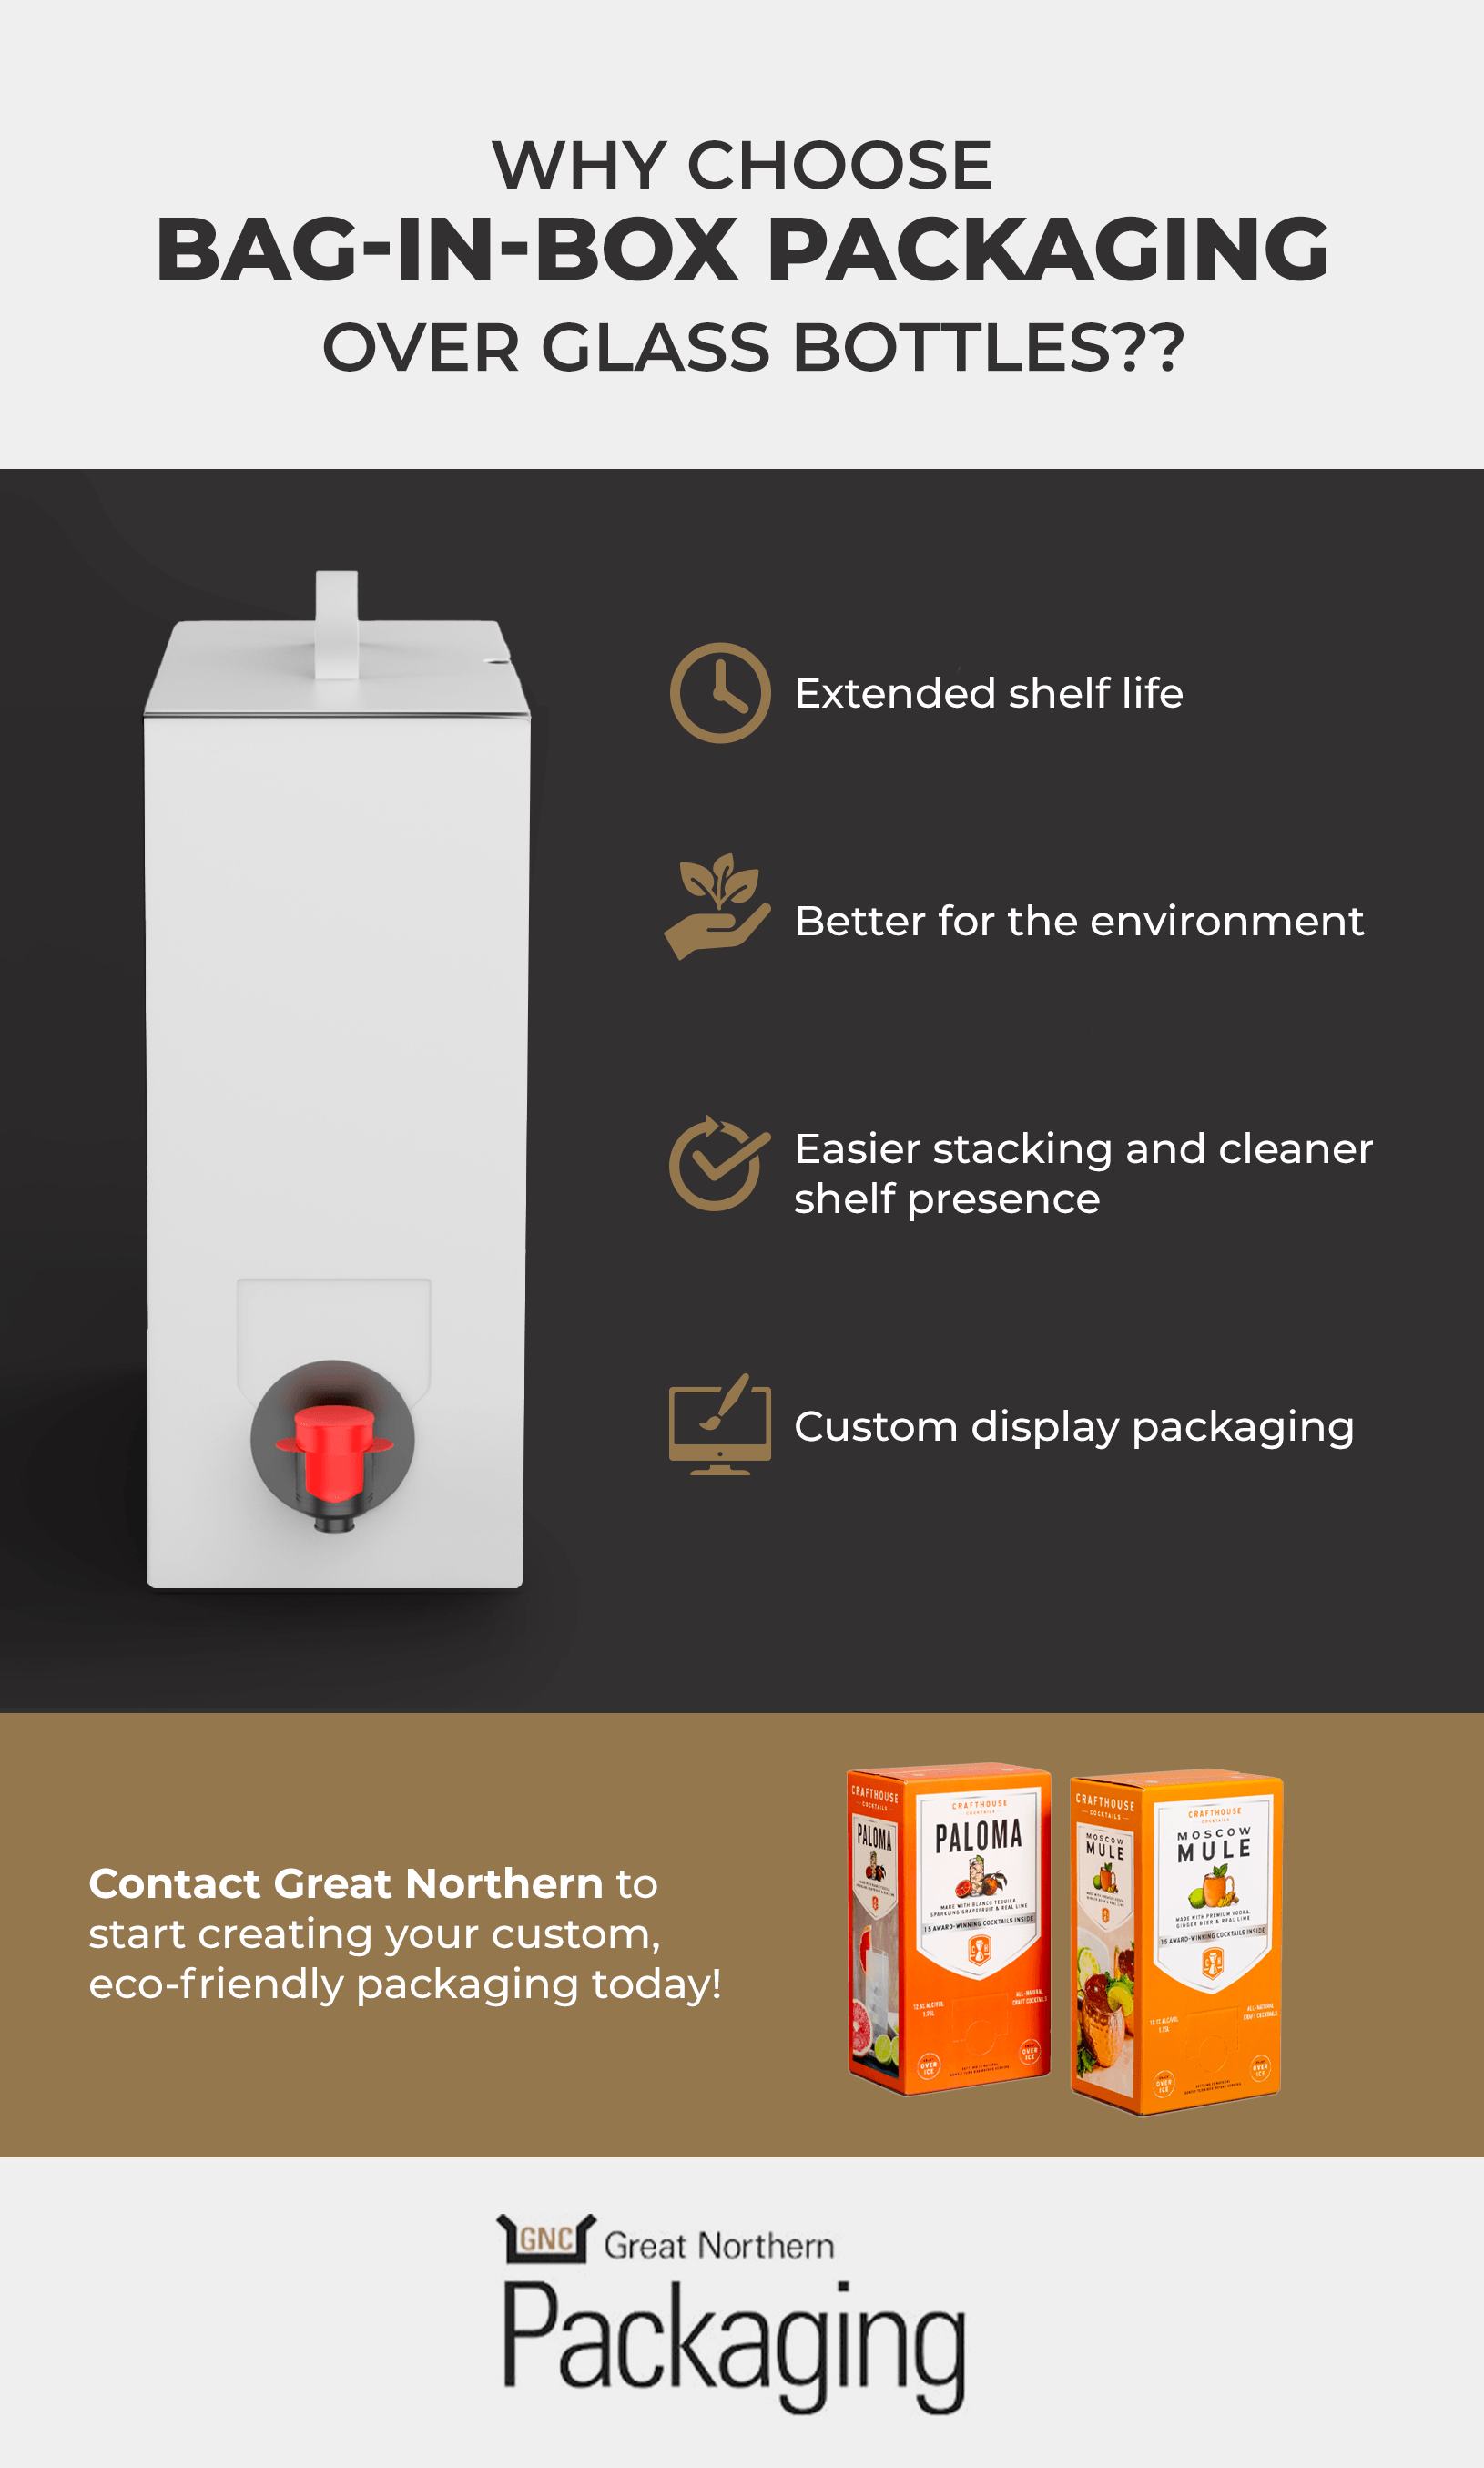 What is Bag in Box Packaging? - Natron Equipments Blog